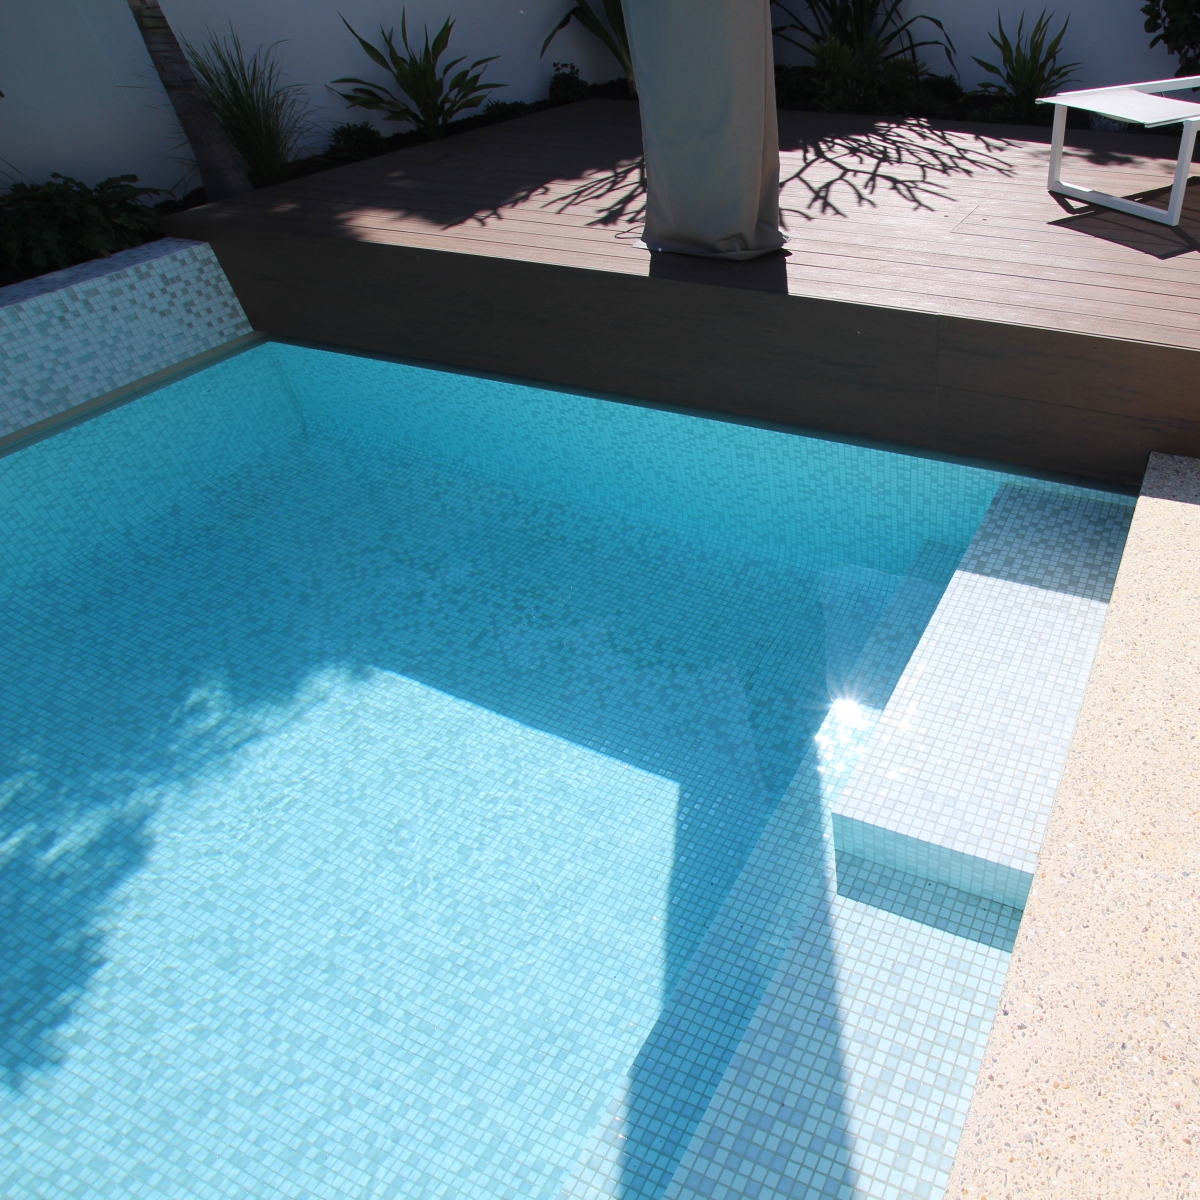 Are your pool tiles safe? 75